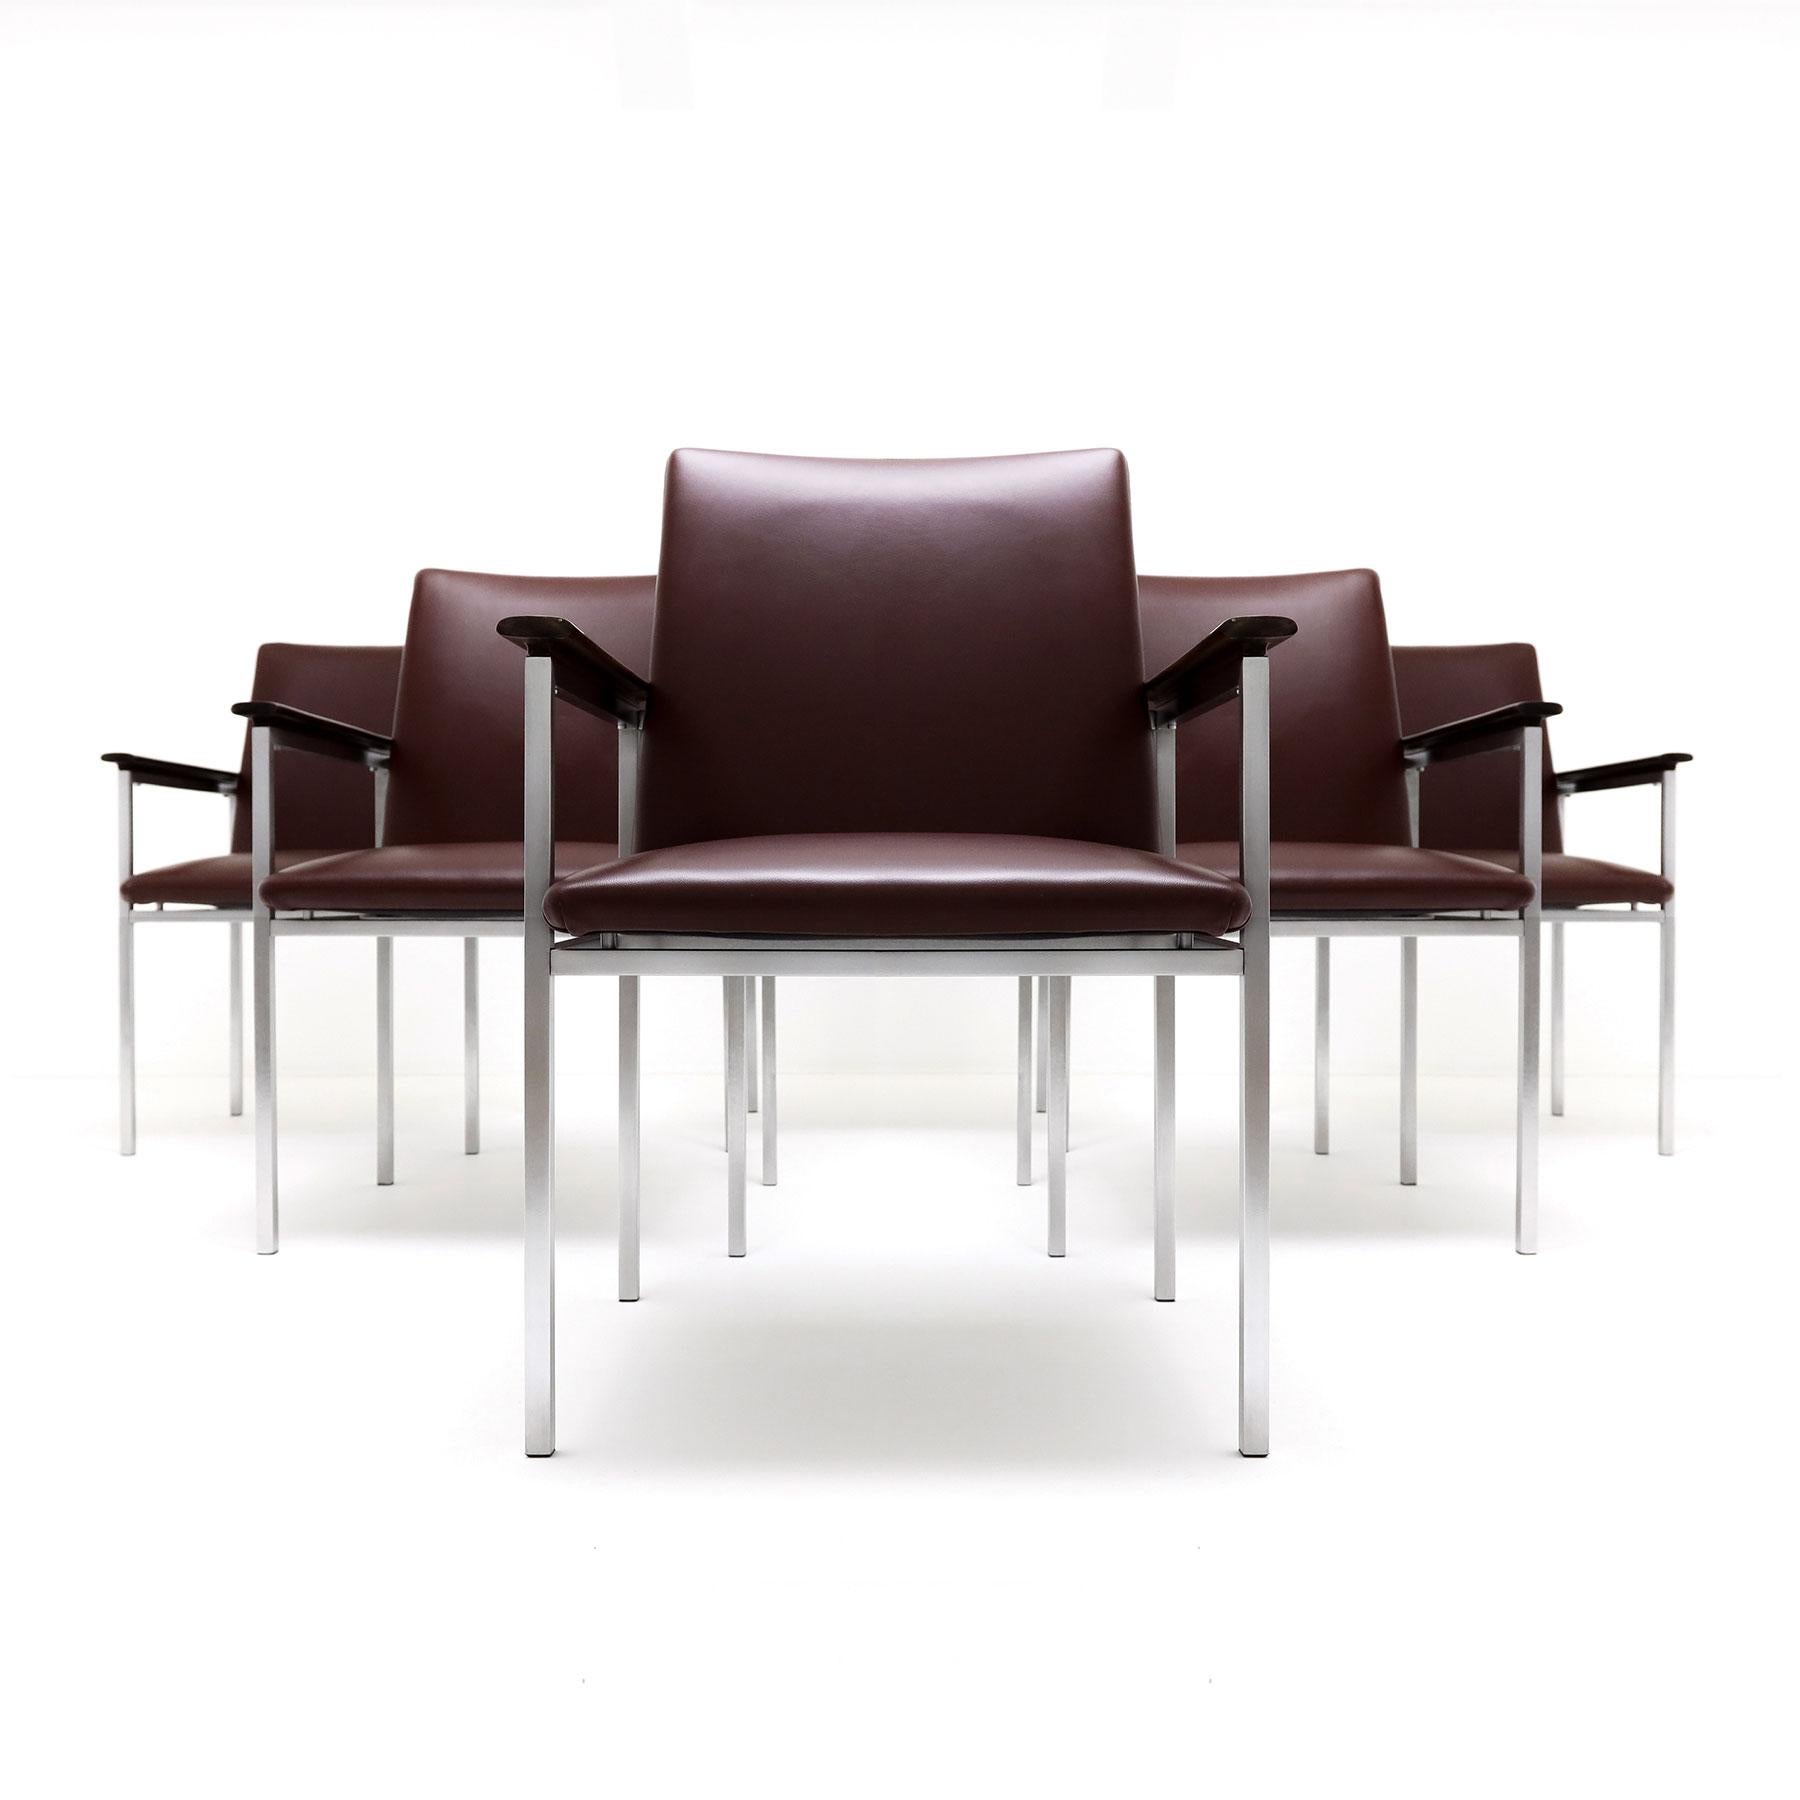 A rare complete set of  6 Sigvard Bernadotte H-line Danish armchairs in dark burgundy leather with brushed steel frames and solid Walnut arms for France & Son.

Designed in the 1960s by the renowned Swedish designer Sigvard Bernedotte the H-line